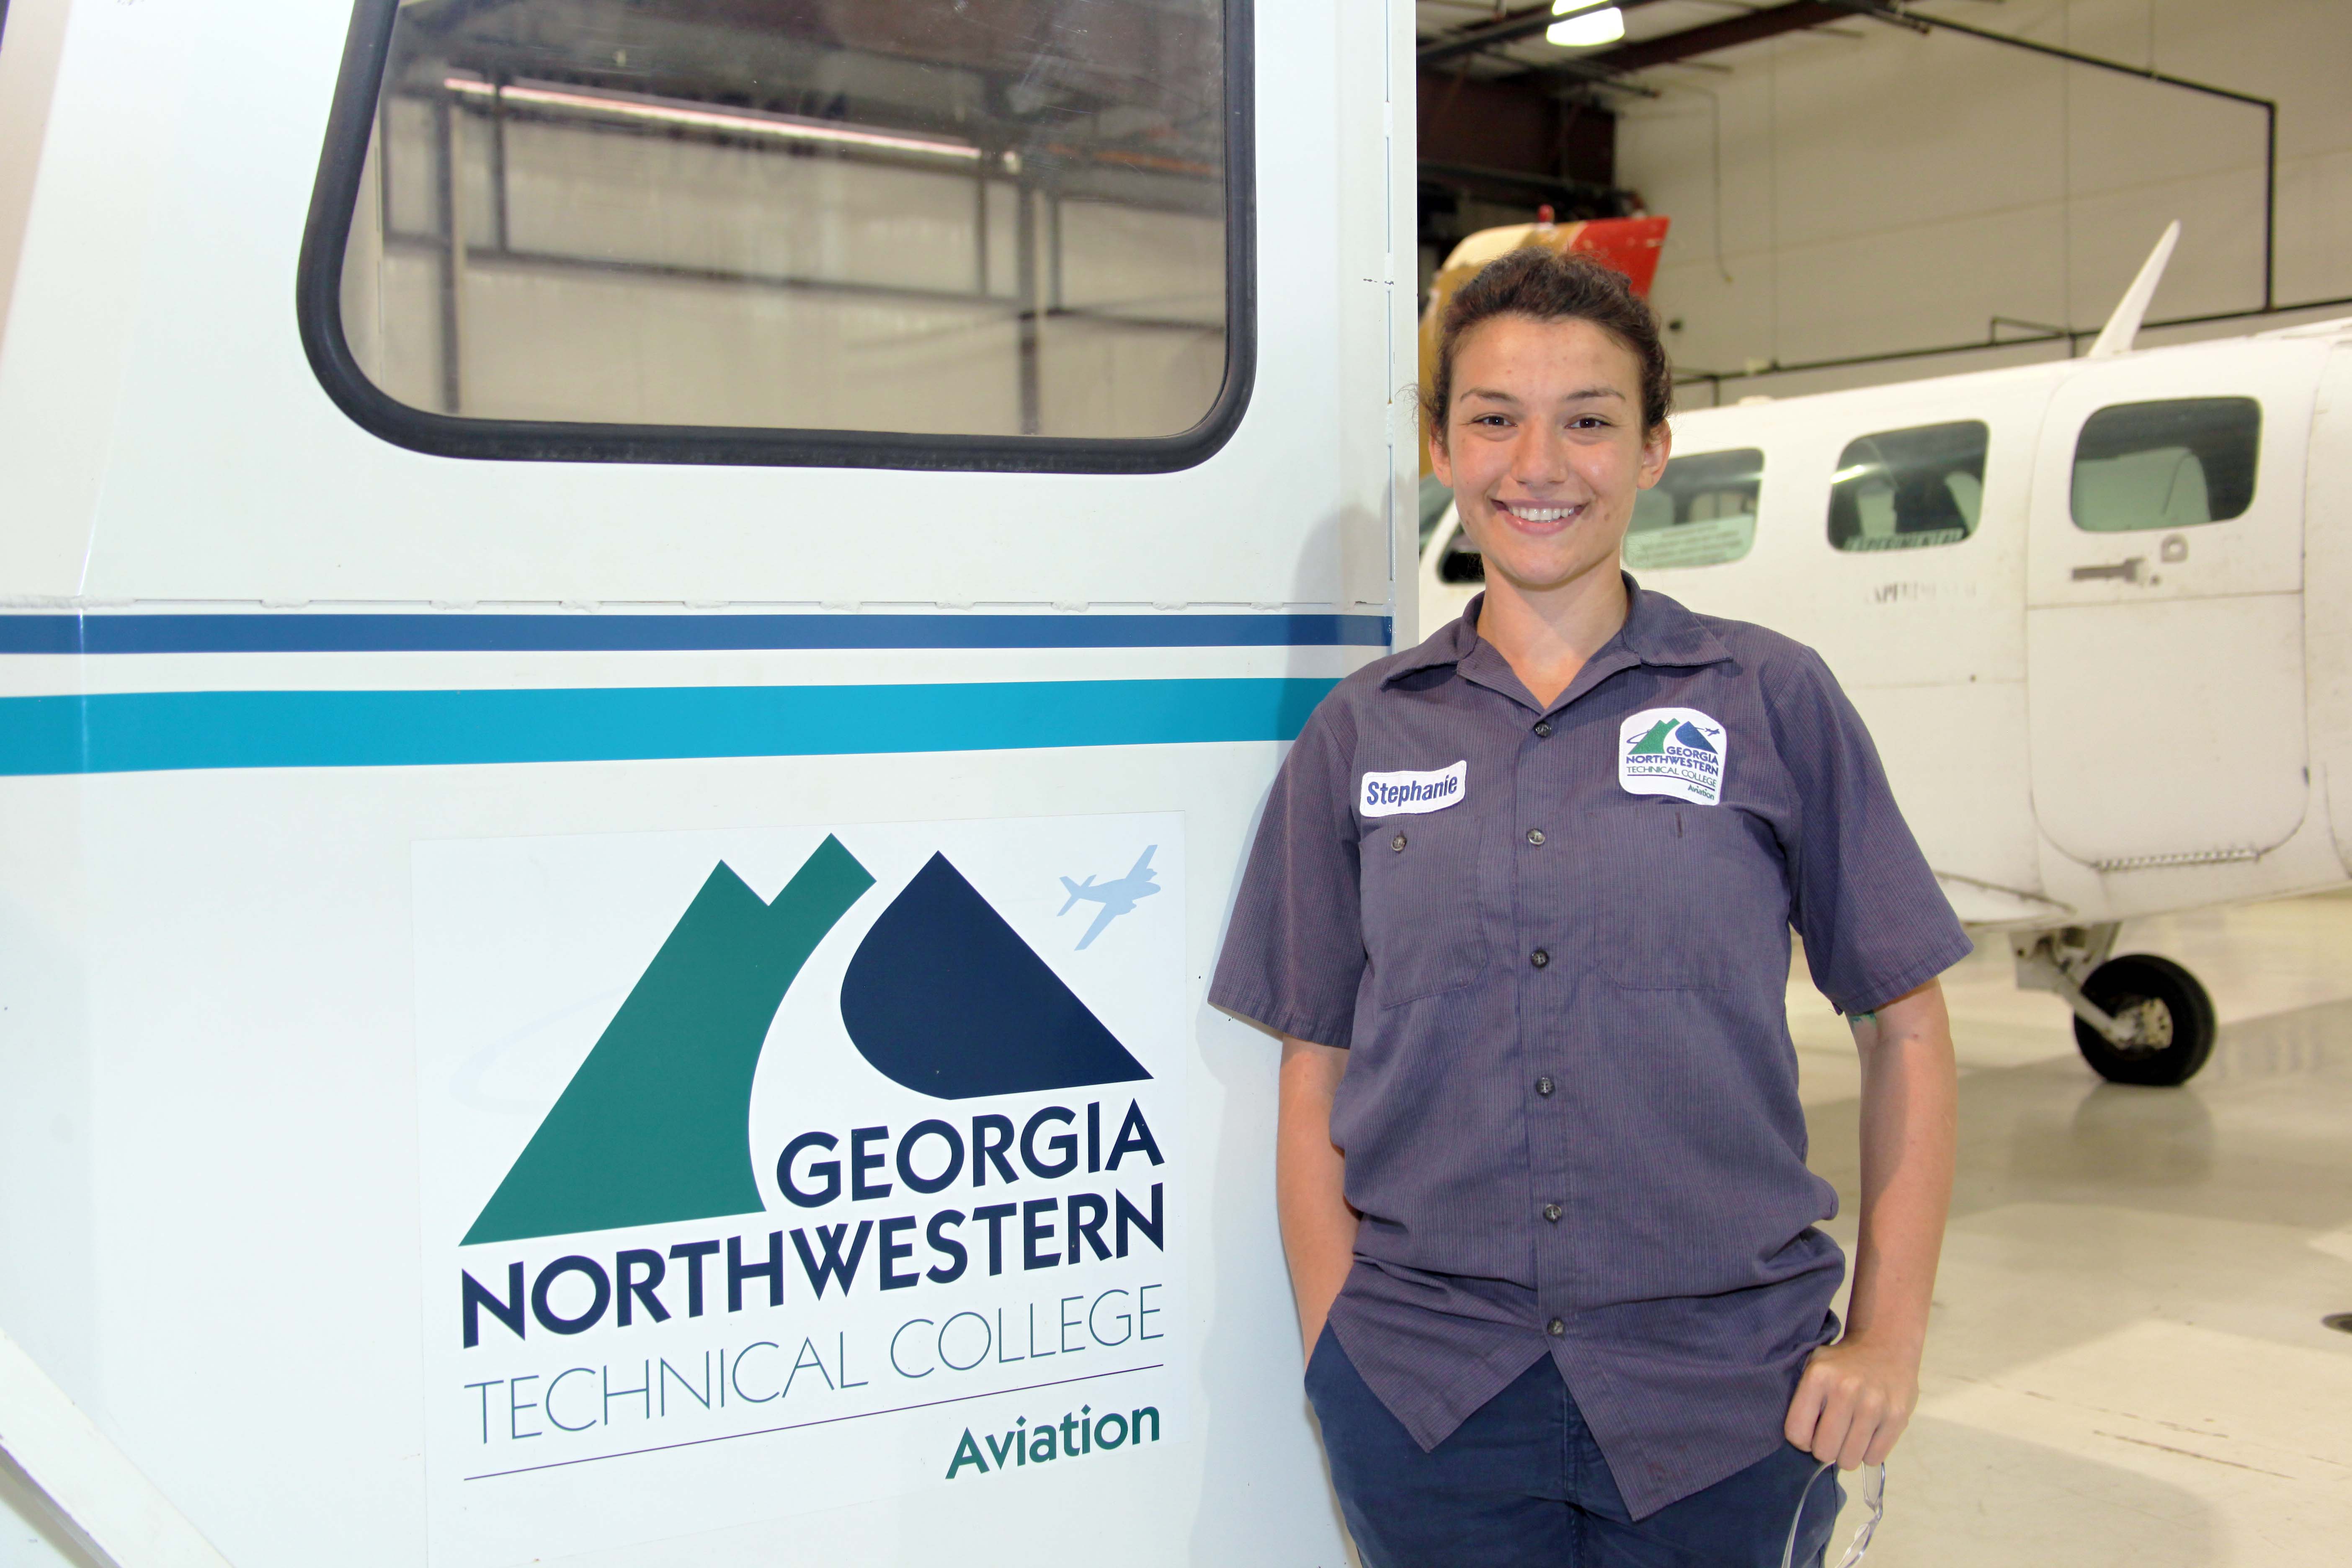 Aviation Maintenance Technology major Stephanie Tarbous received the $5,000 Delta Air Lines Aircraft Maintenance Technology Scholarship to help with her education at GNTC.